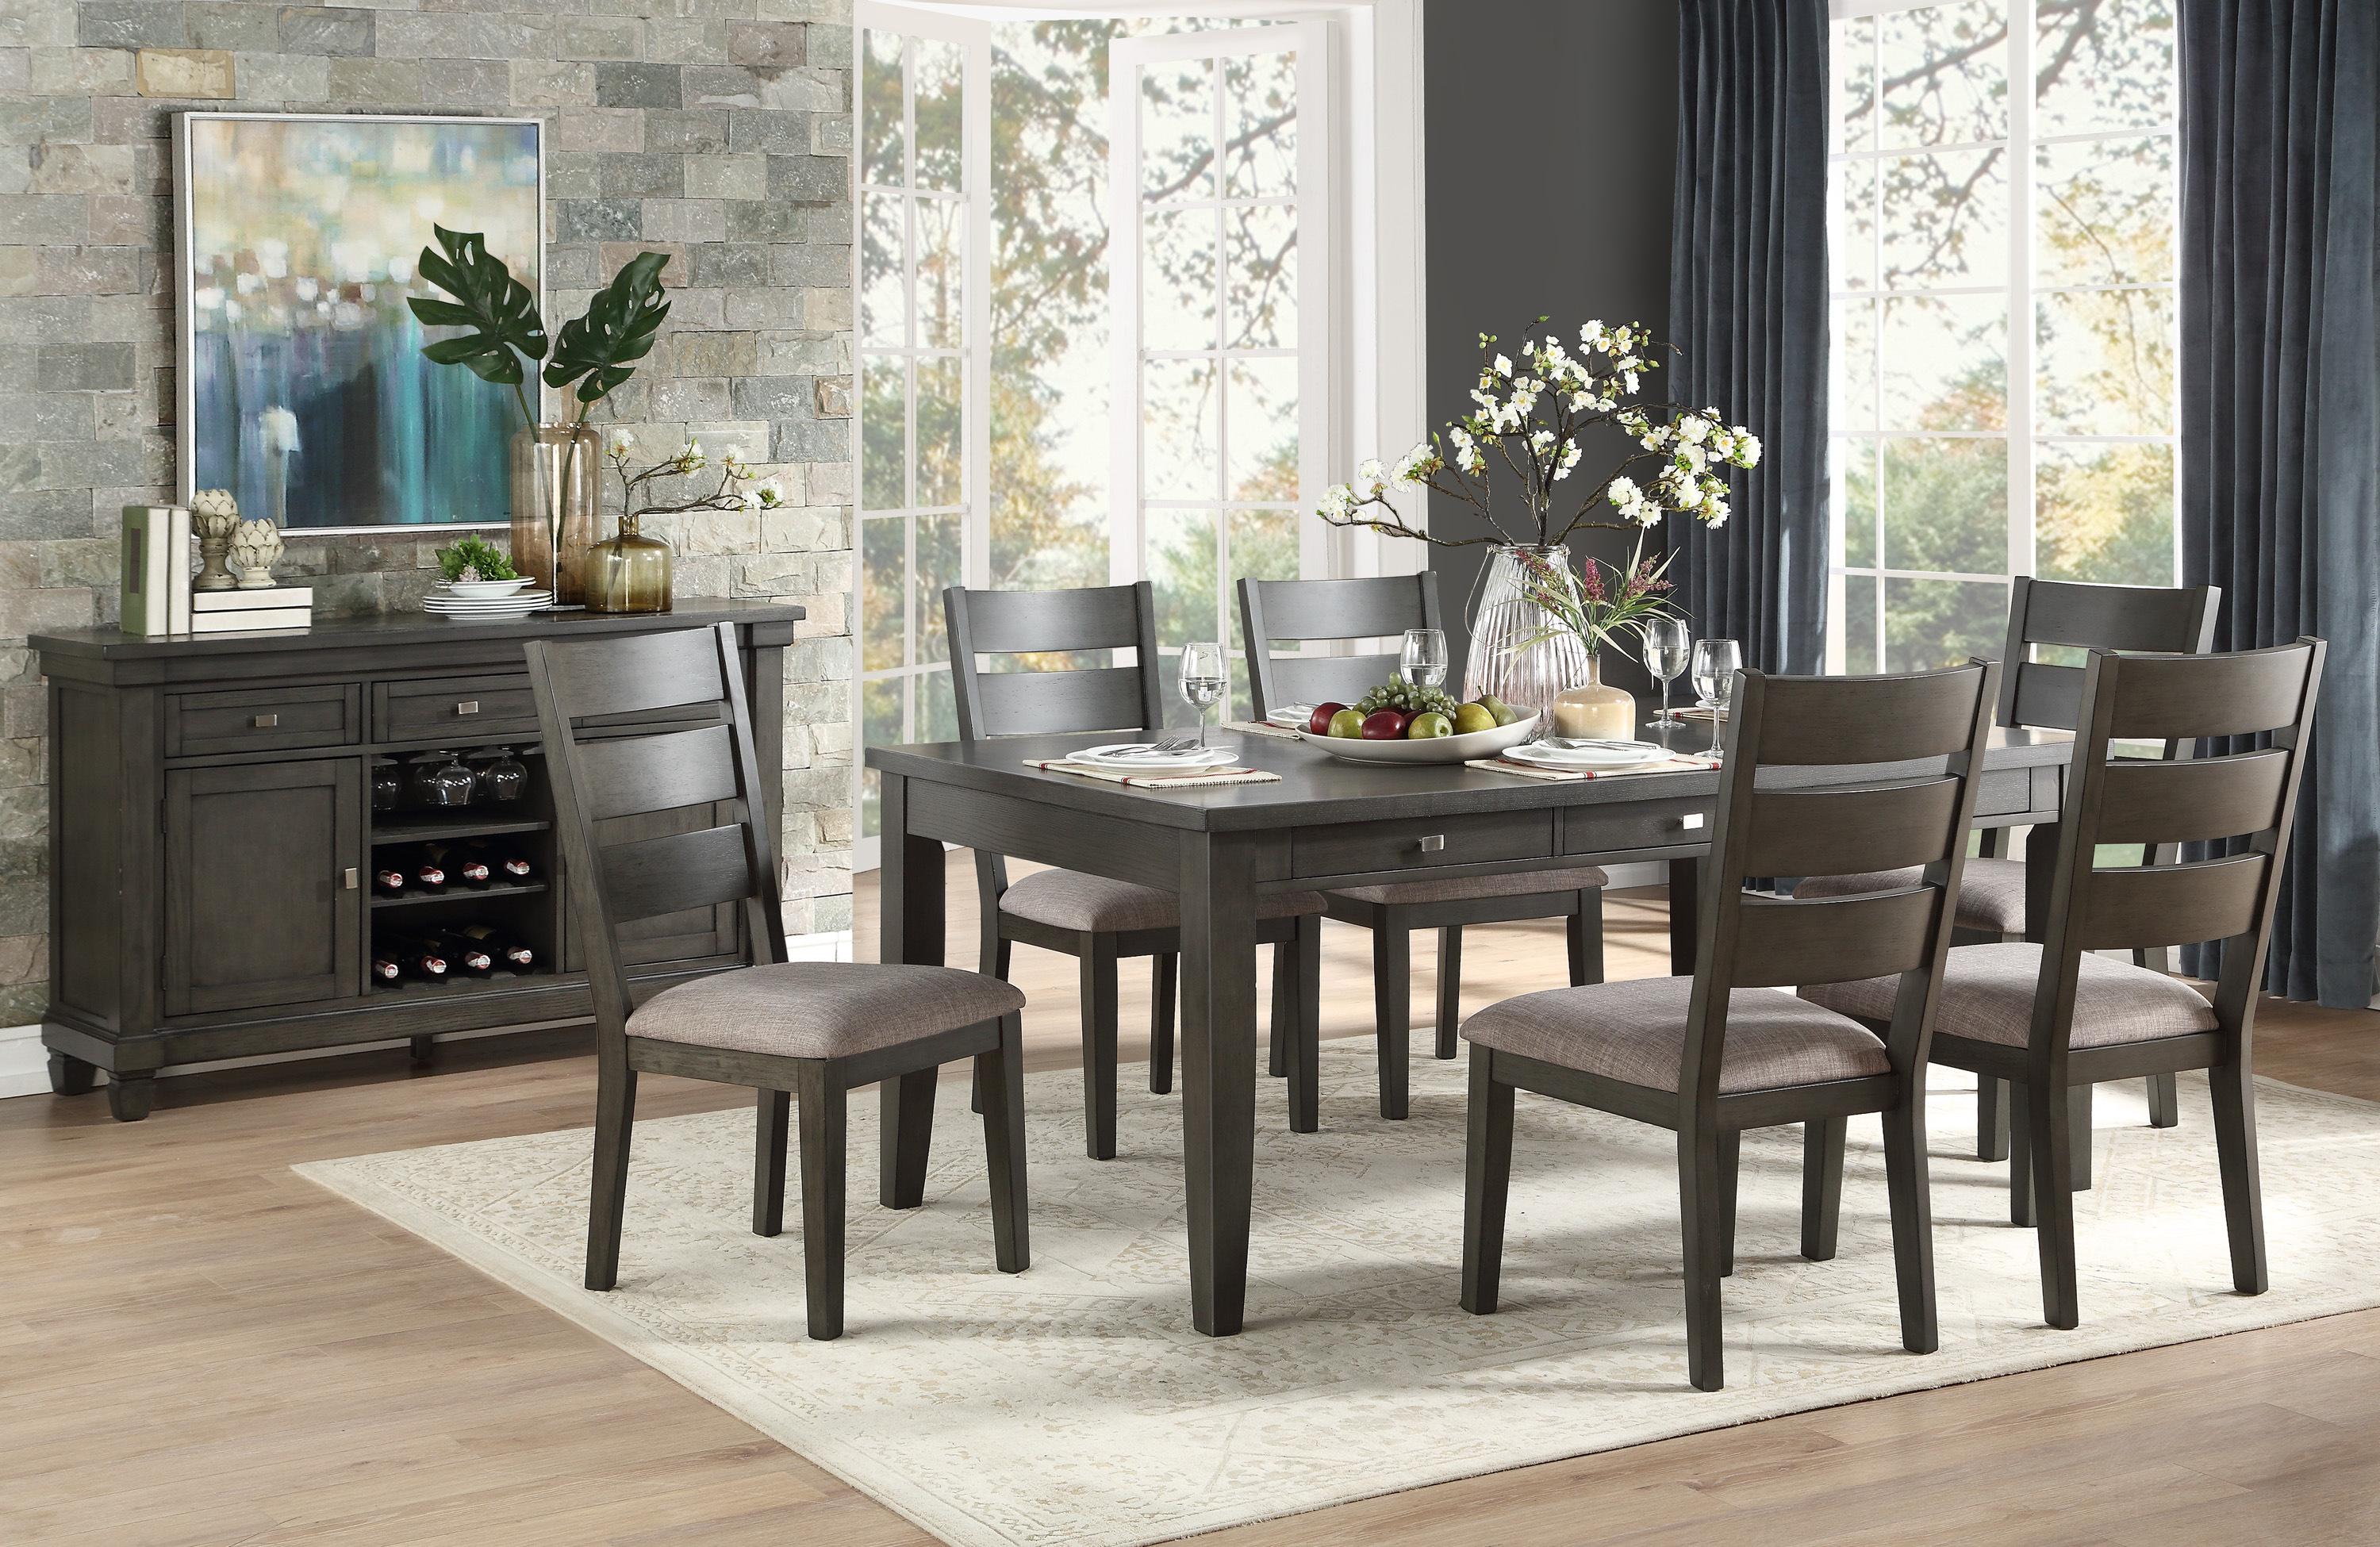 Transitional Dining Room Set 5674-72*8PC Baresford 5674-72*8PC in Gray Polyester